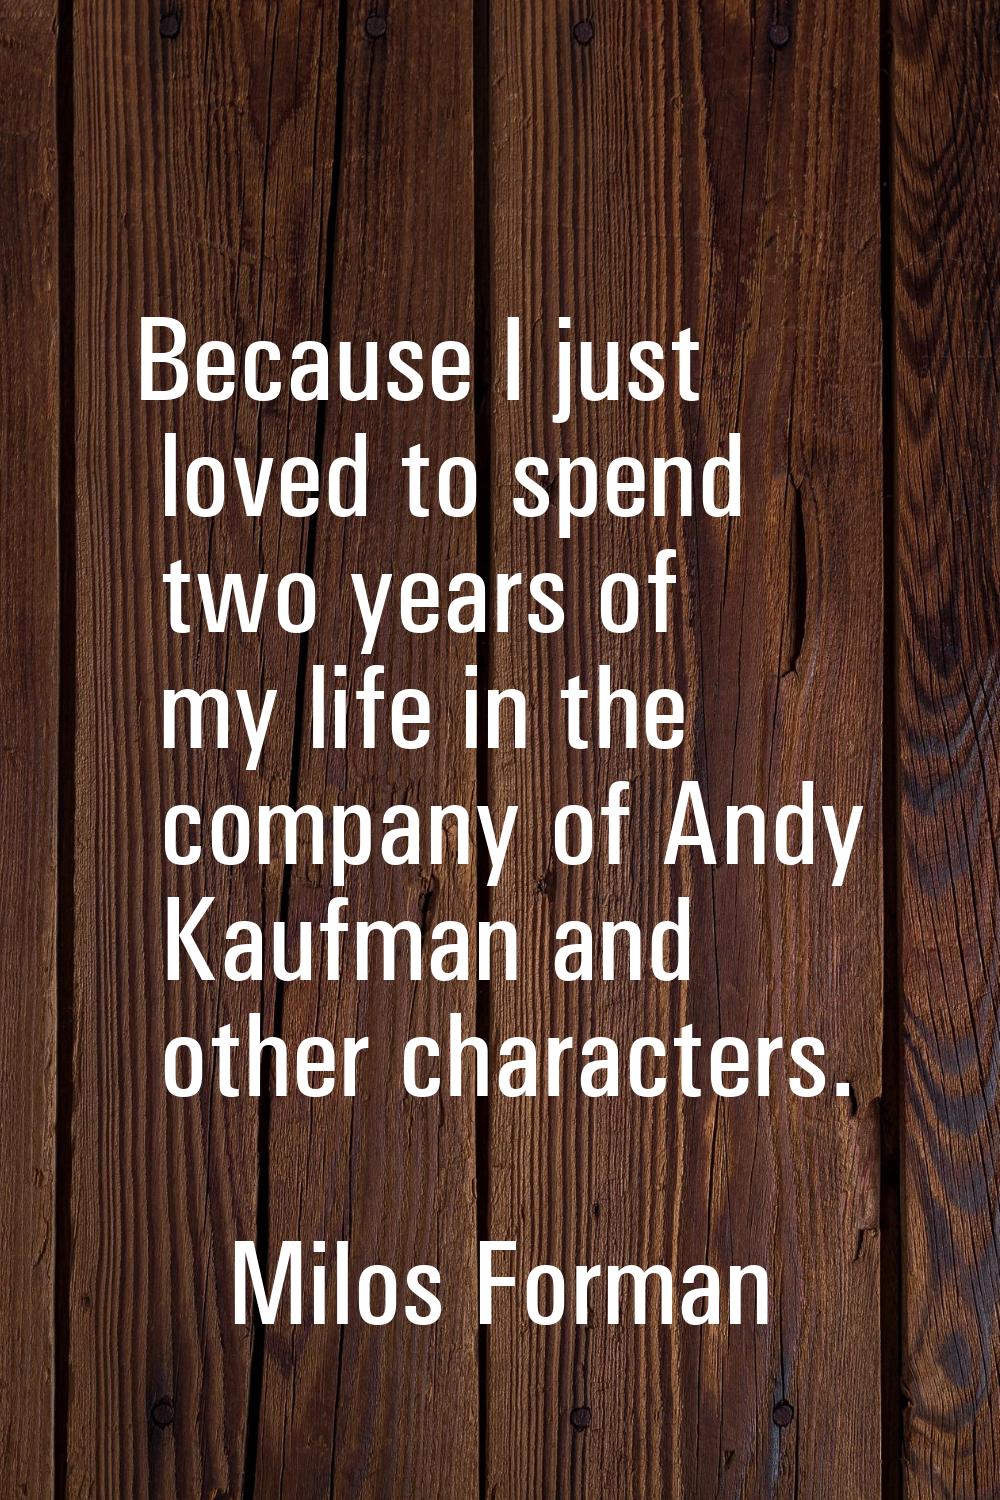 Because I just loved to spend two years of my life in the company of Andy Kaufman and other charact